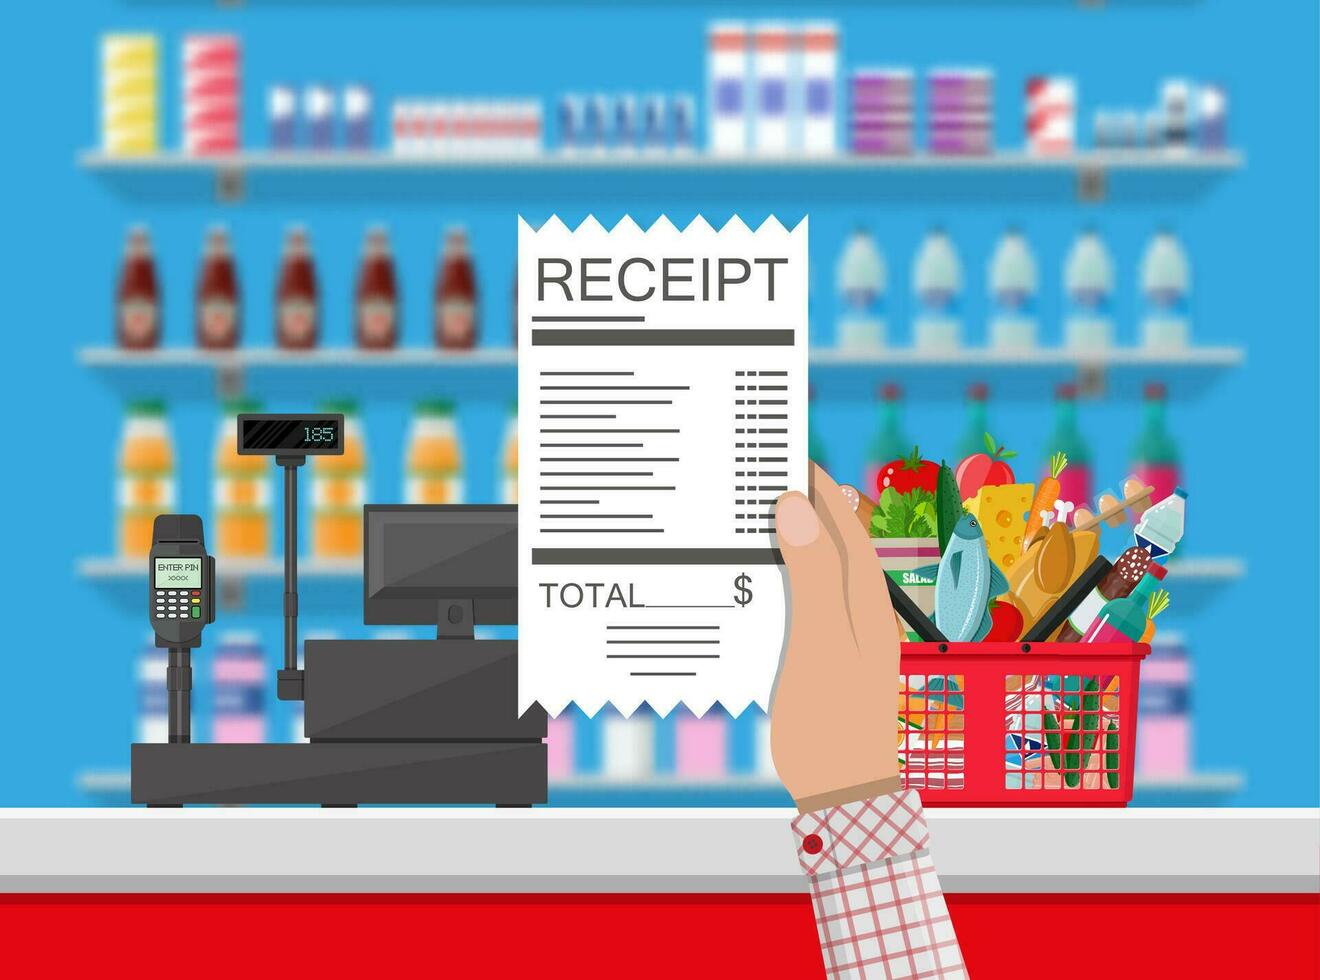 Supermarket interior. Cashier counter workplace. Hand with receipt. Basket with food and drinks. Shelves with products. Cash register, pos terminal and keypad. Vector illustration in flat style